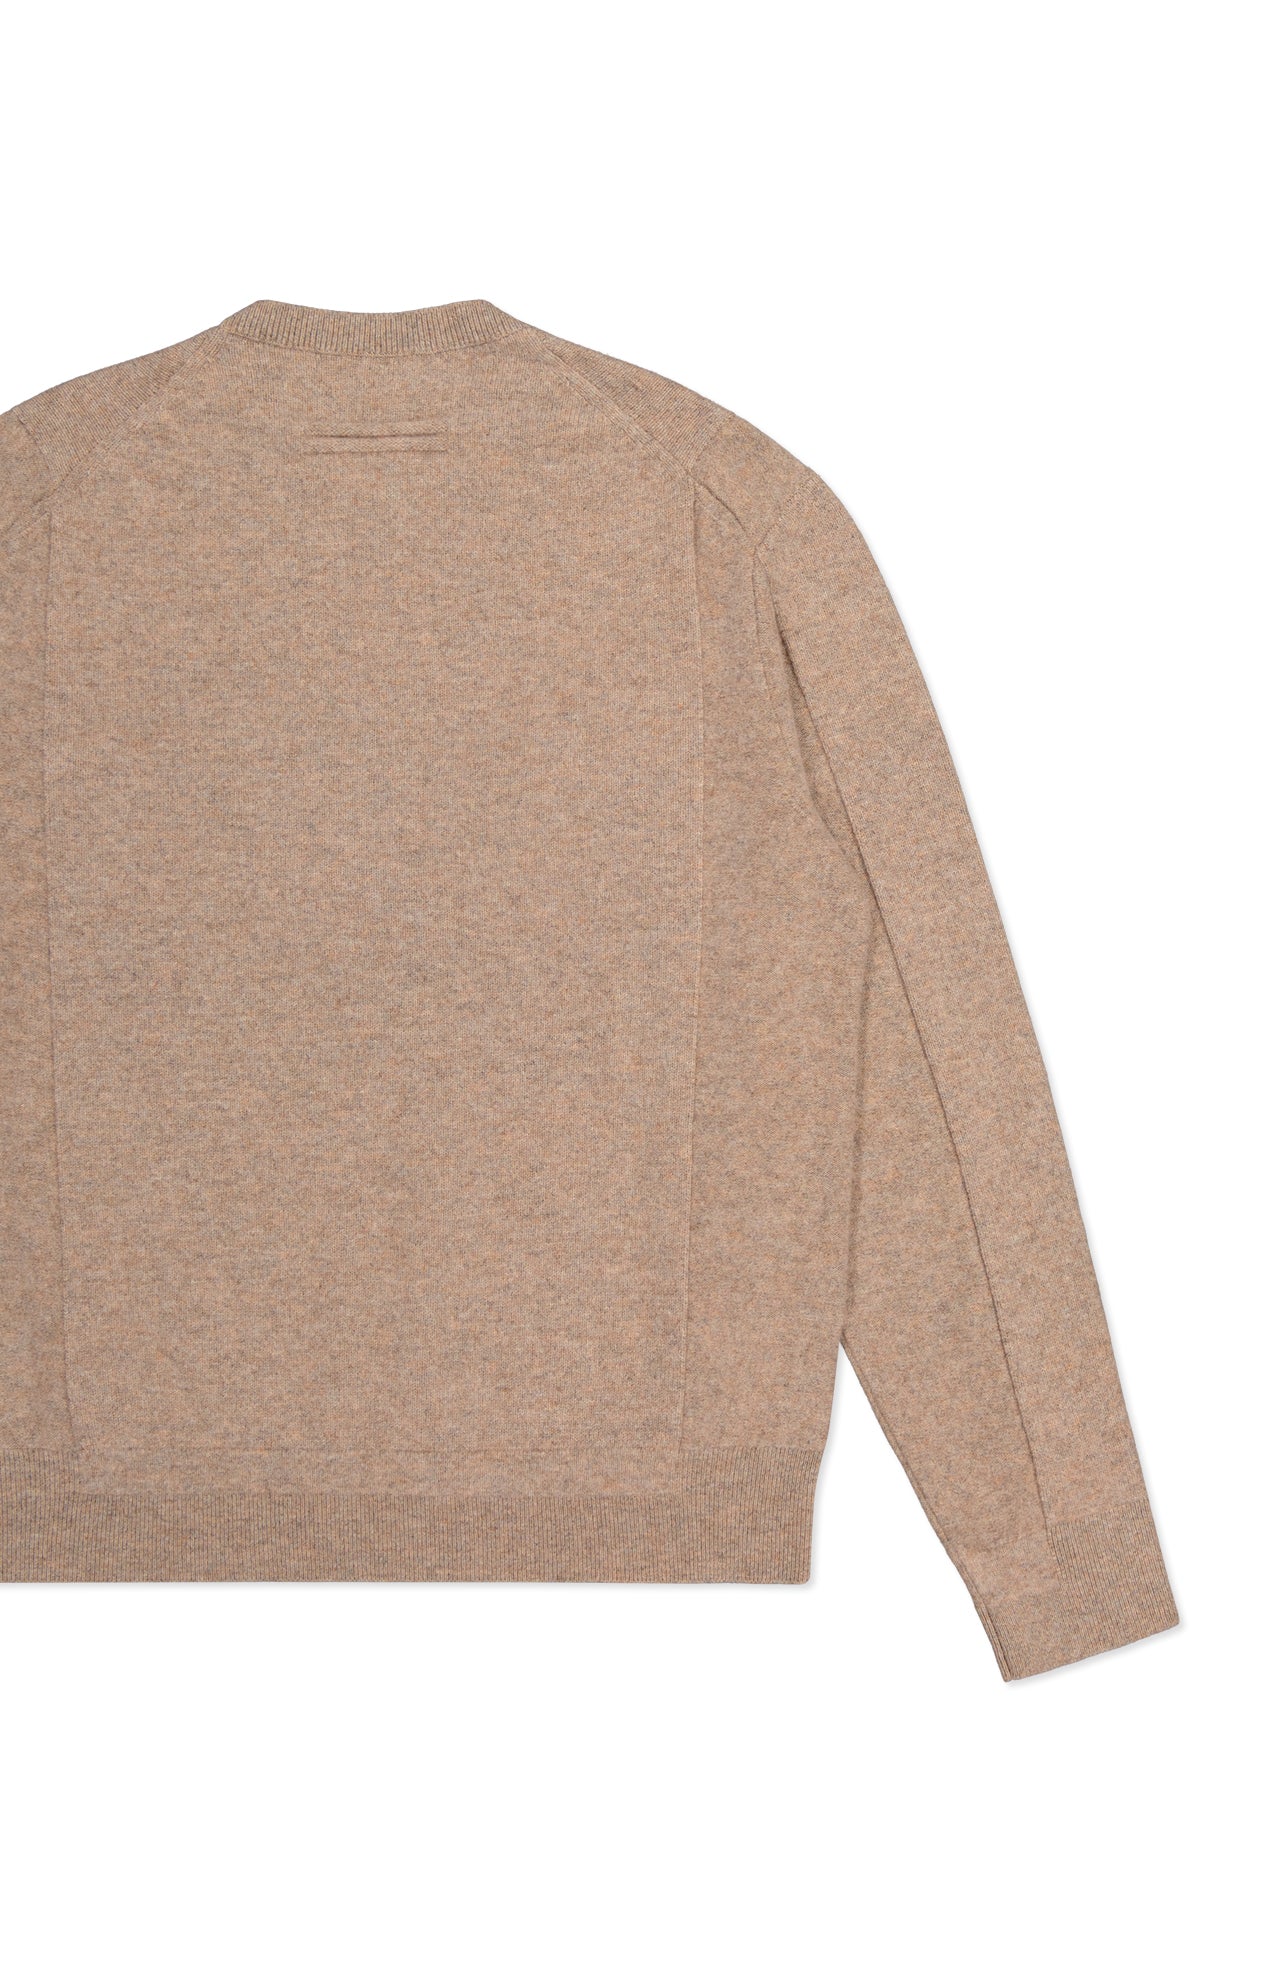 Wool and Cashmere Crewneck Sweater (7192524685427)